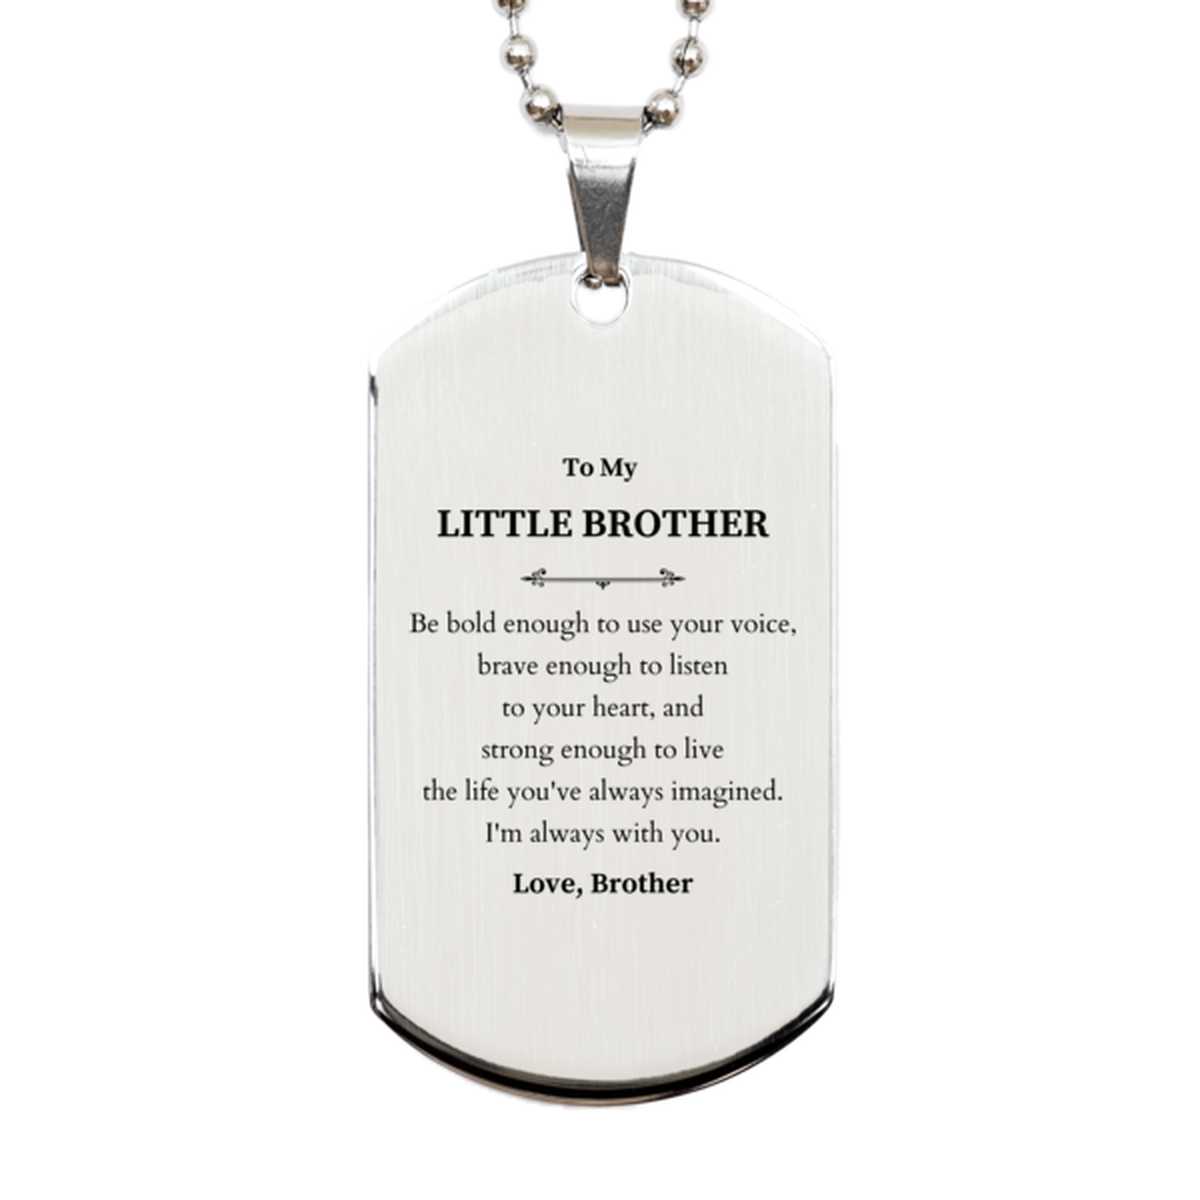 Keepsake Little Brother Silver Dog Tag Gift Idea Graduation Christmas Birthday Little Brother from Brother, Little Brother Be bold enough to use your voice, brave enough to listen to your heart. Love, Brother